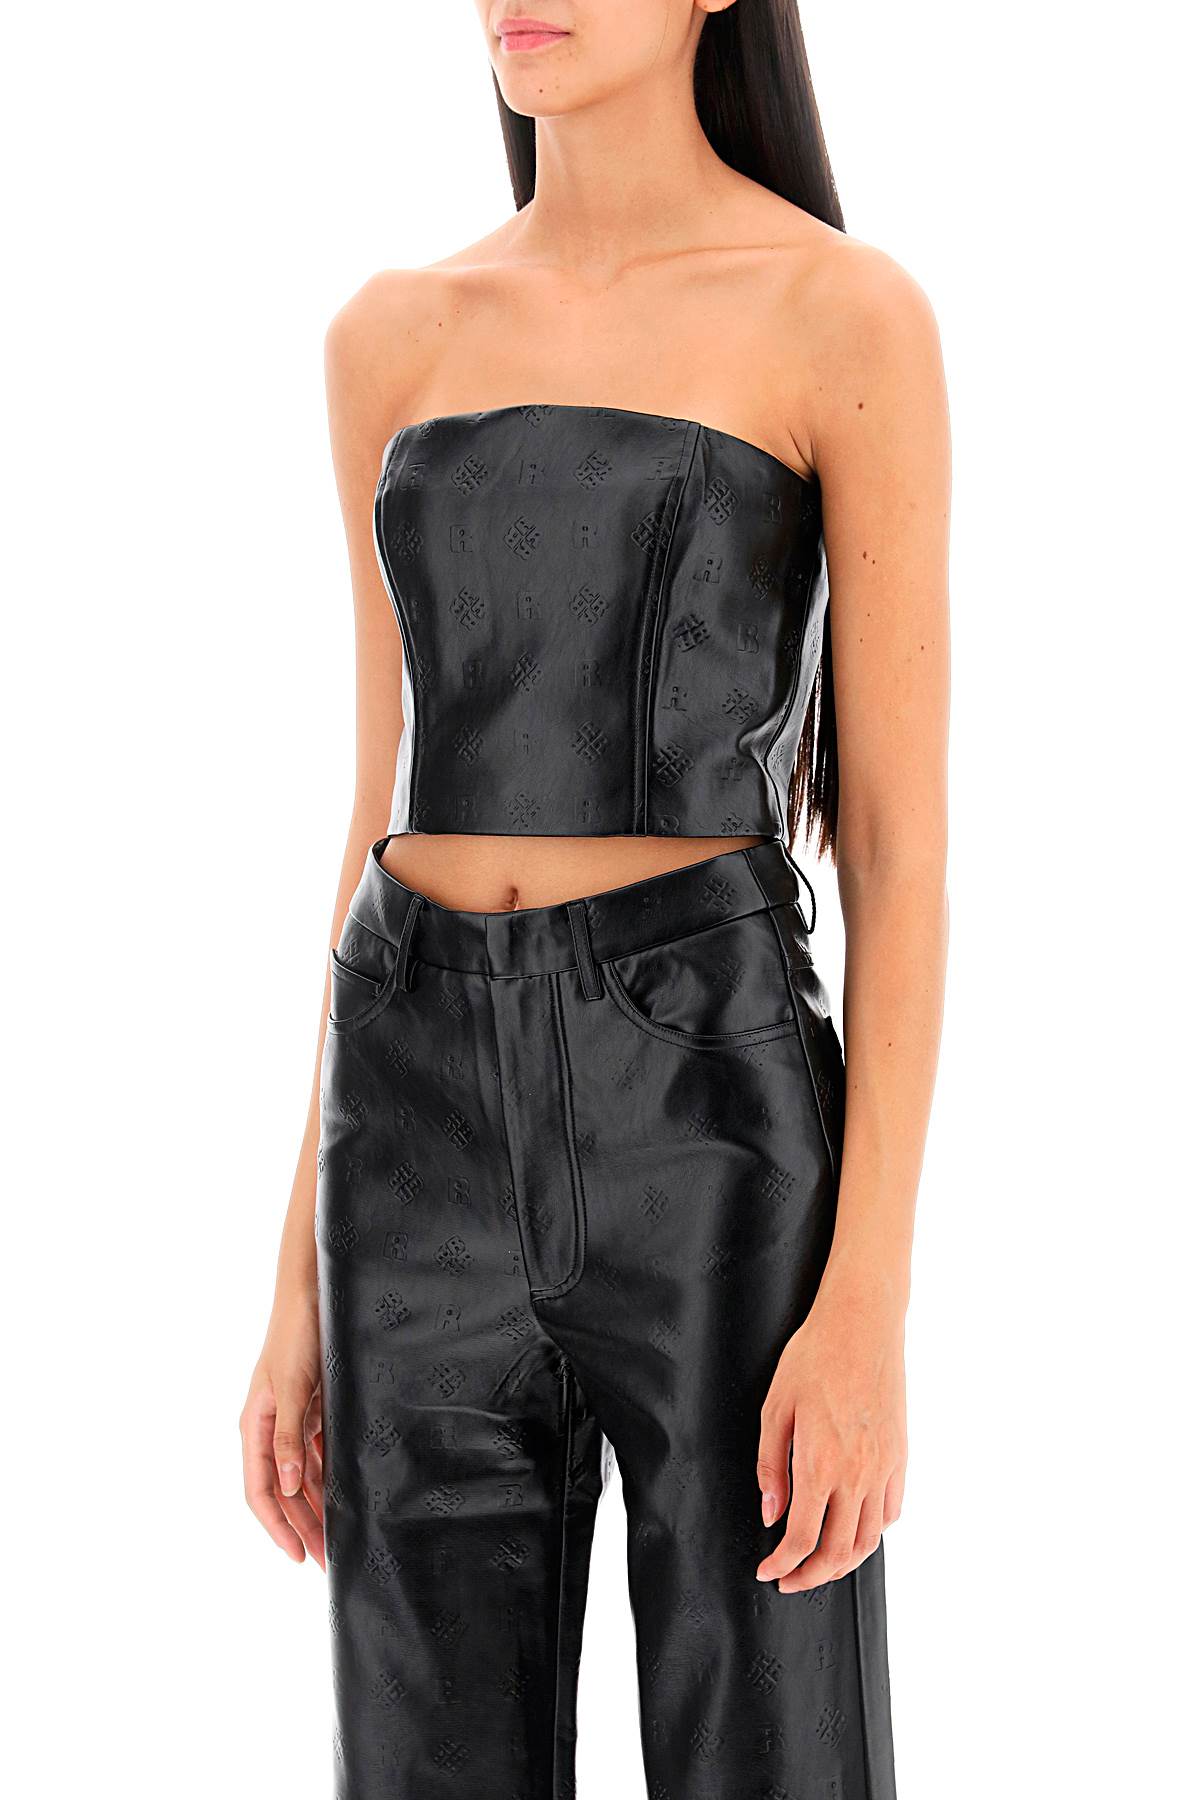 Rotate faux-leather cropped top-women > clothing > tops-Rotate-Urbanheer